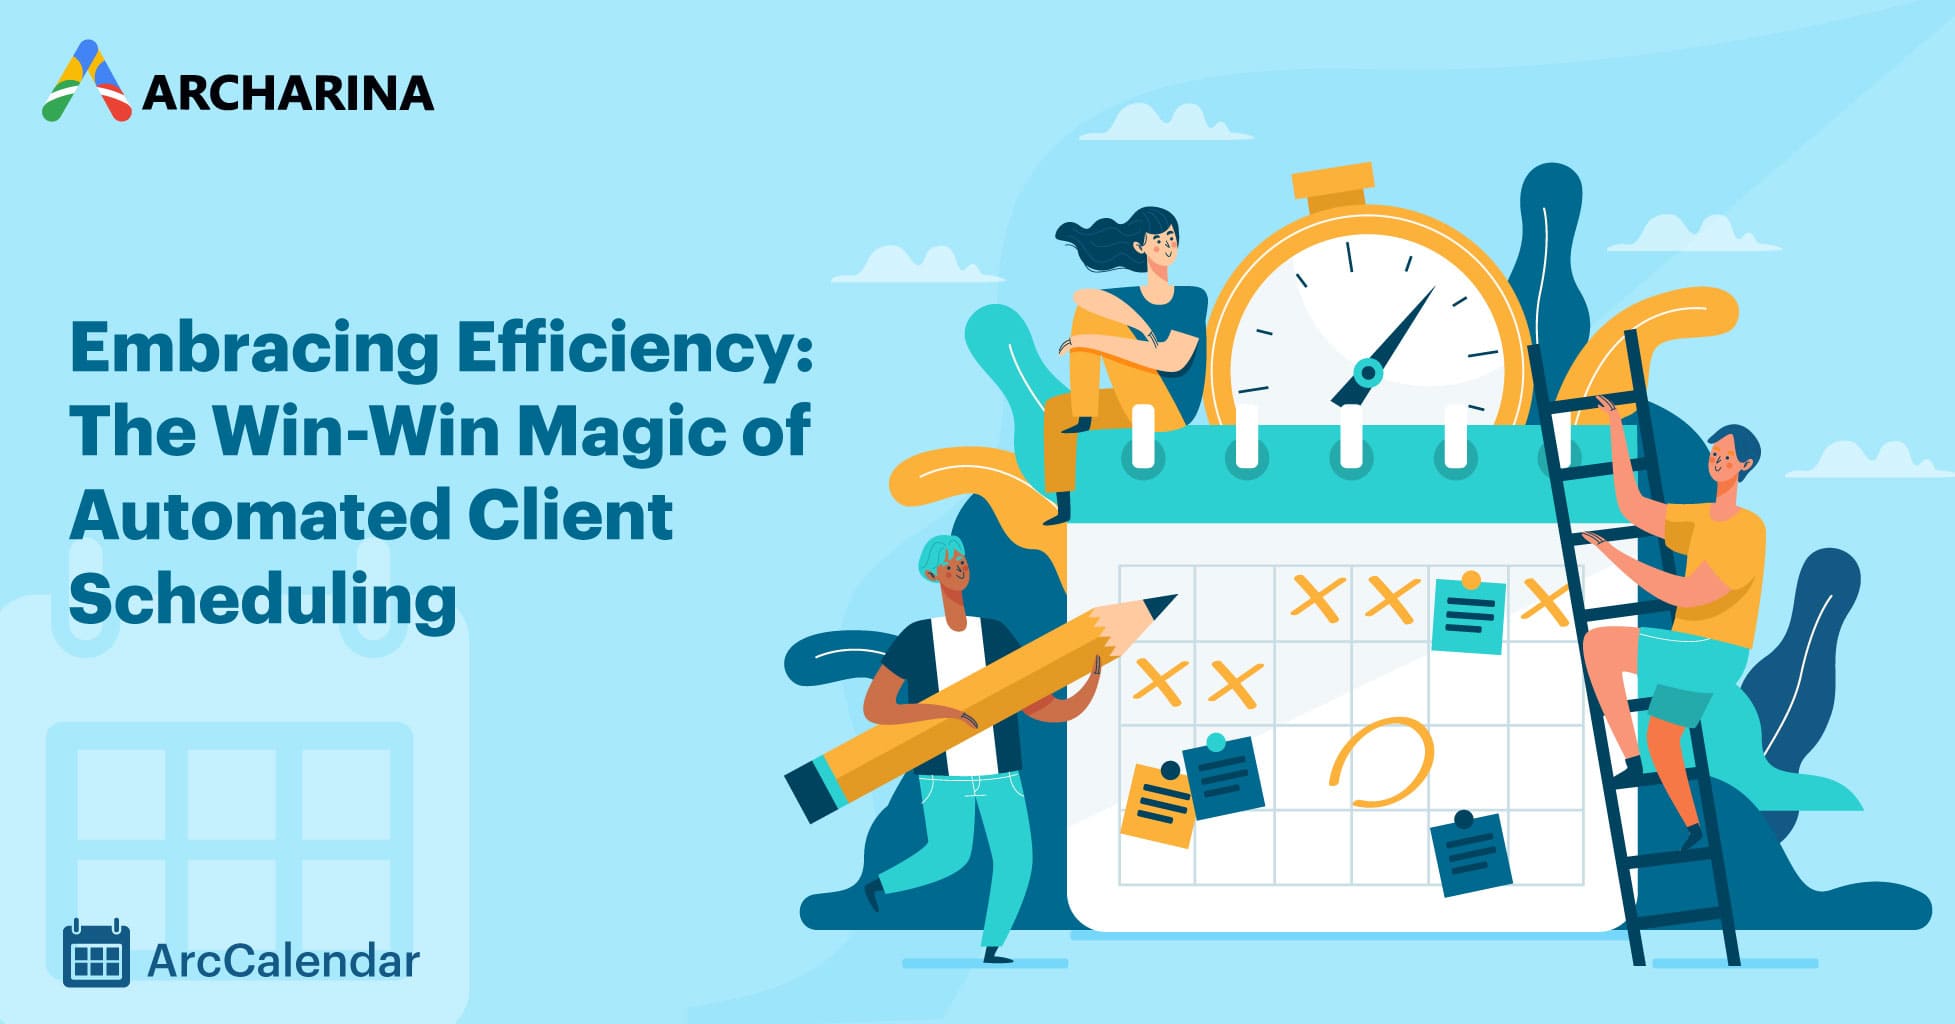 Embracing Efficiency: The Win-Win Magic of Automated Client Scheduling